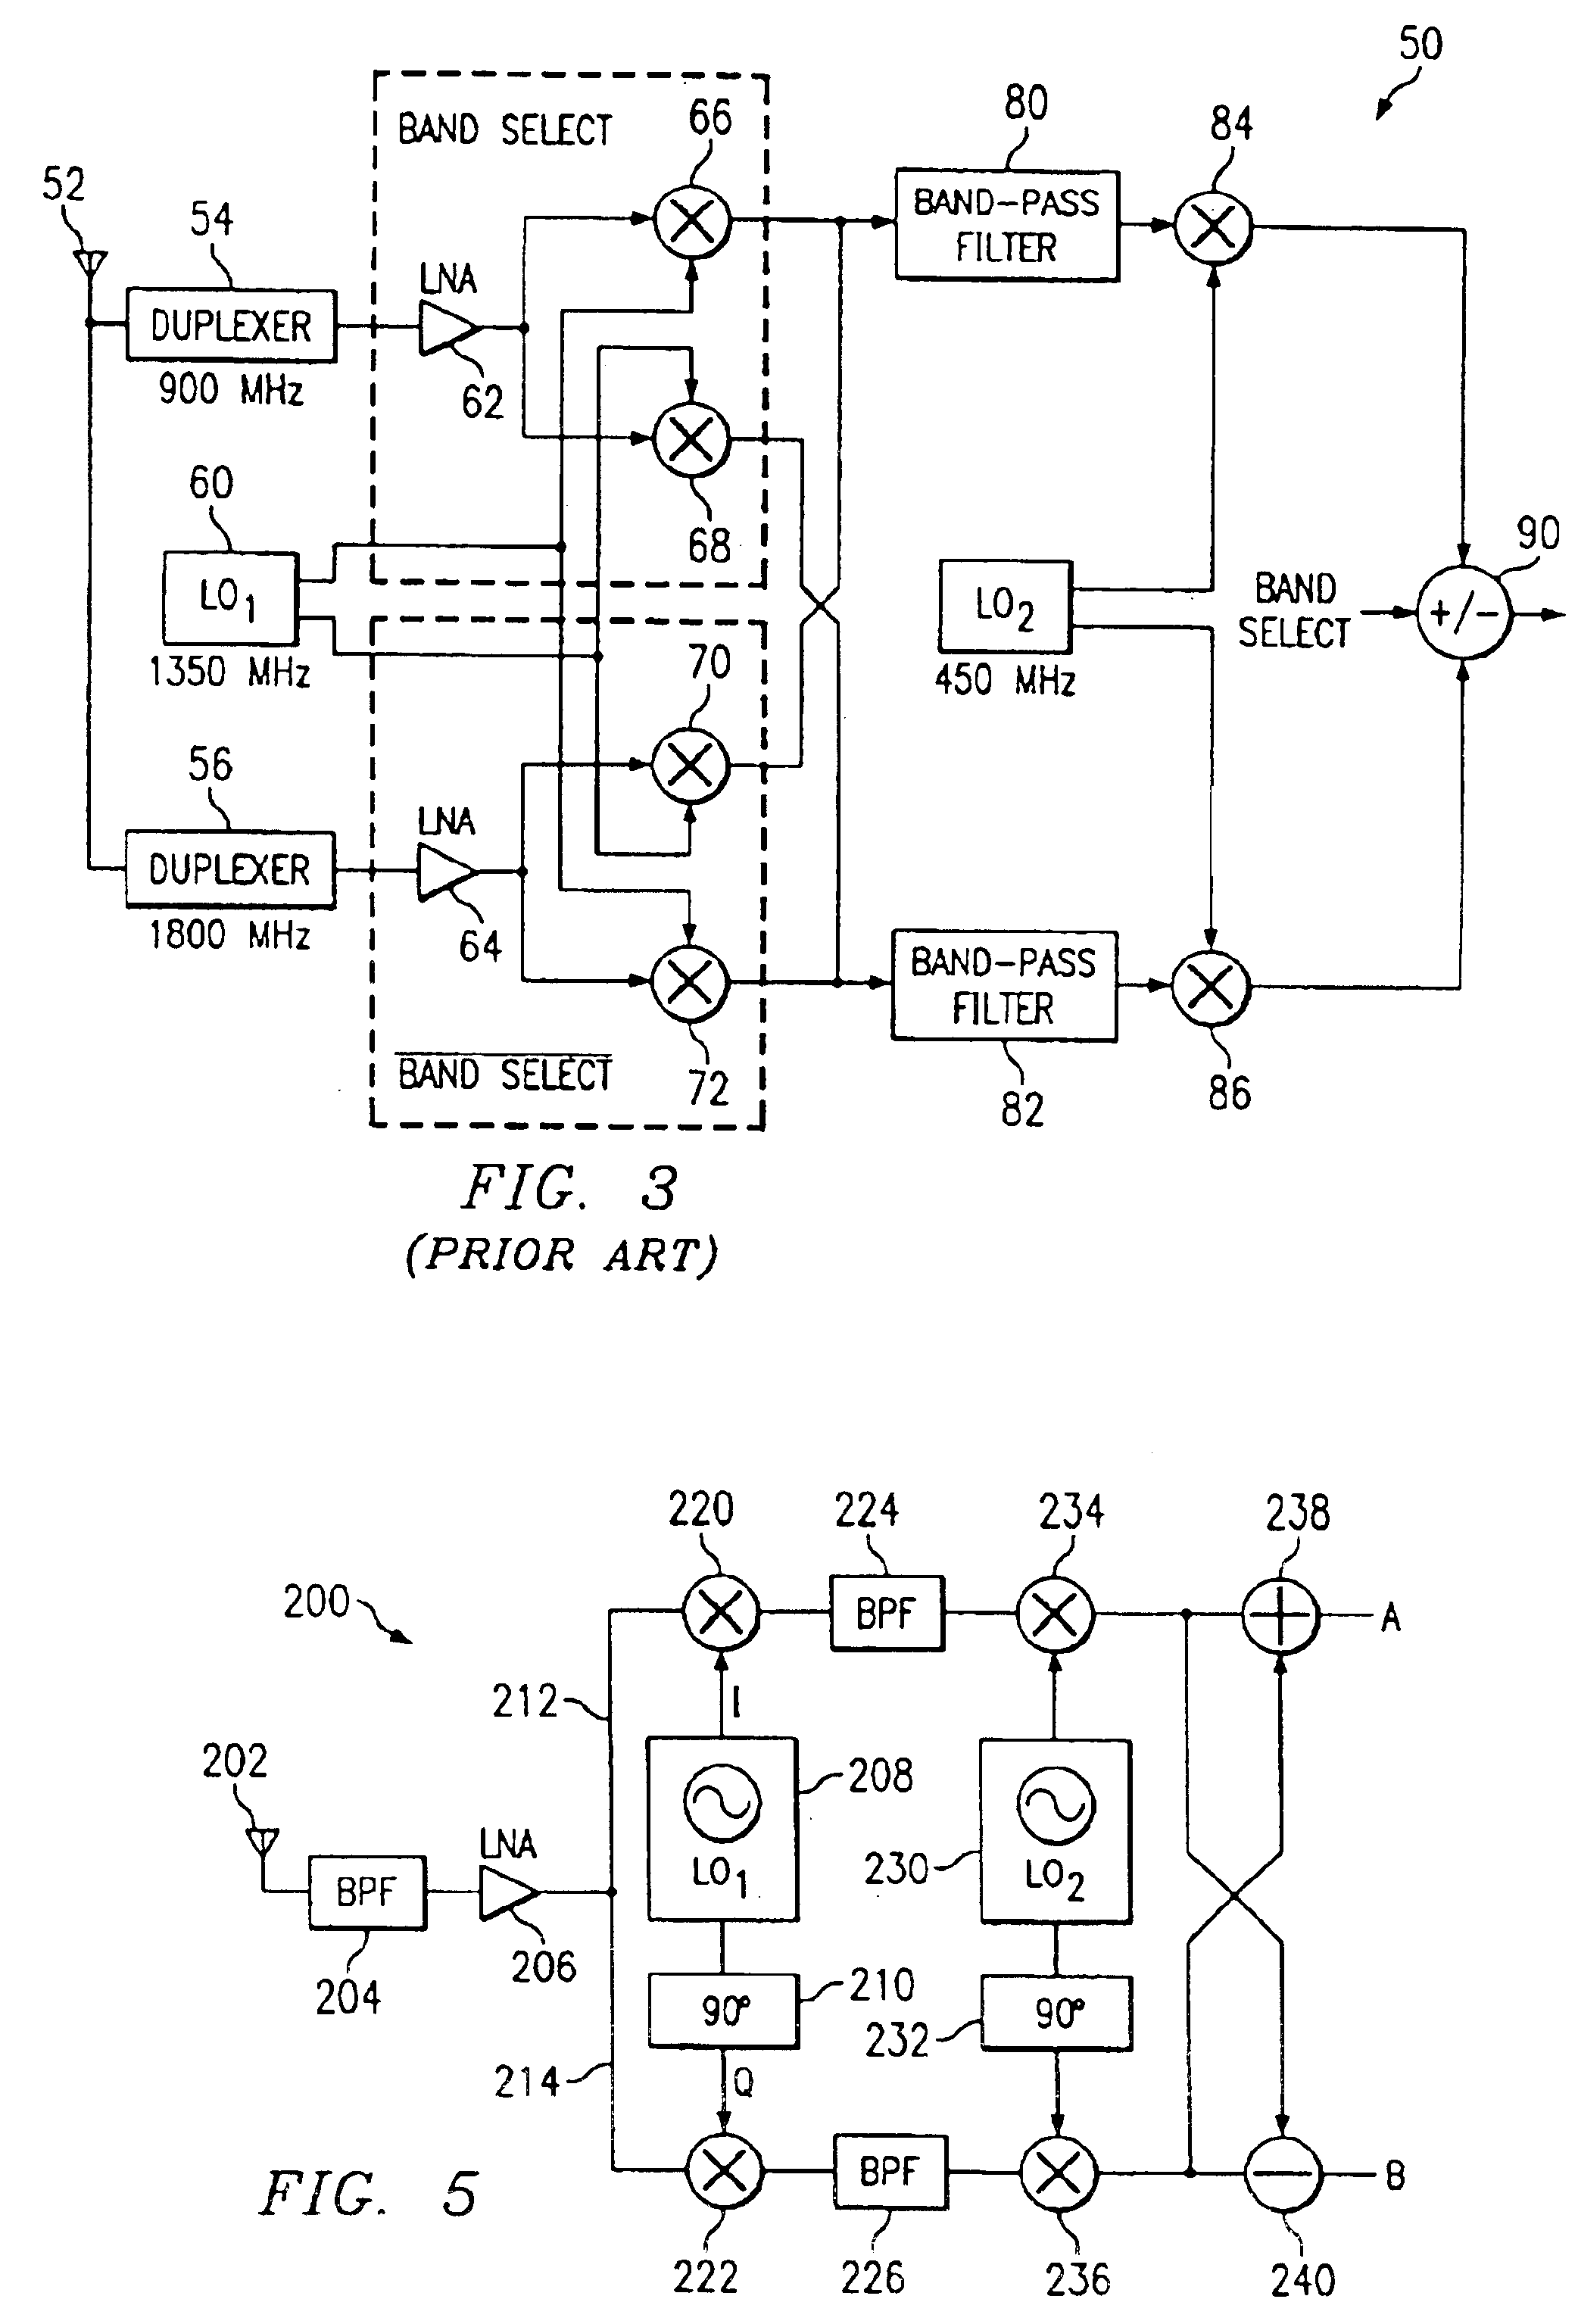 Concurrent dual-band receiver architecture